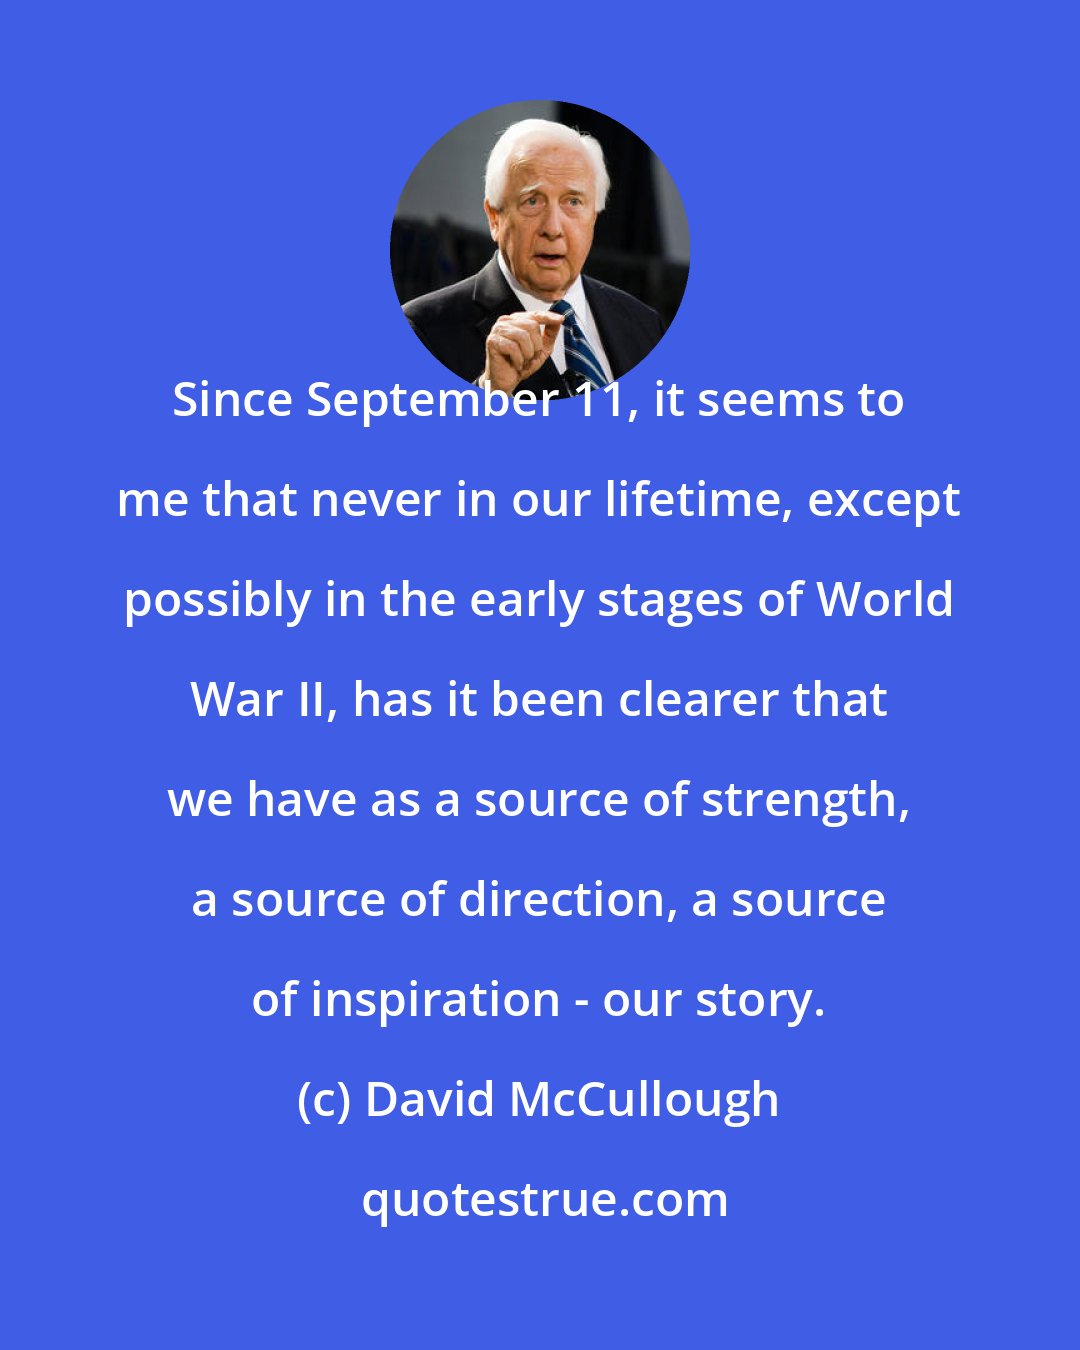 David McCullough: Since September 11, it seems to me that never in our lifetime, except possibly in the early stages of World War II, has it been clearer that we have as a source of strength, a source of direction, a source of inspiration - our story.